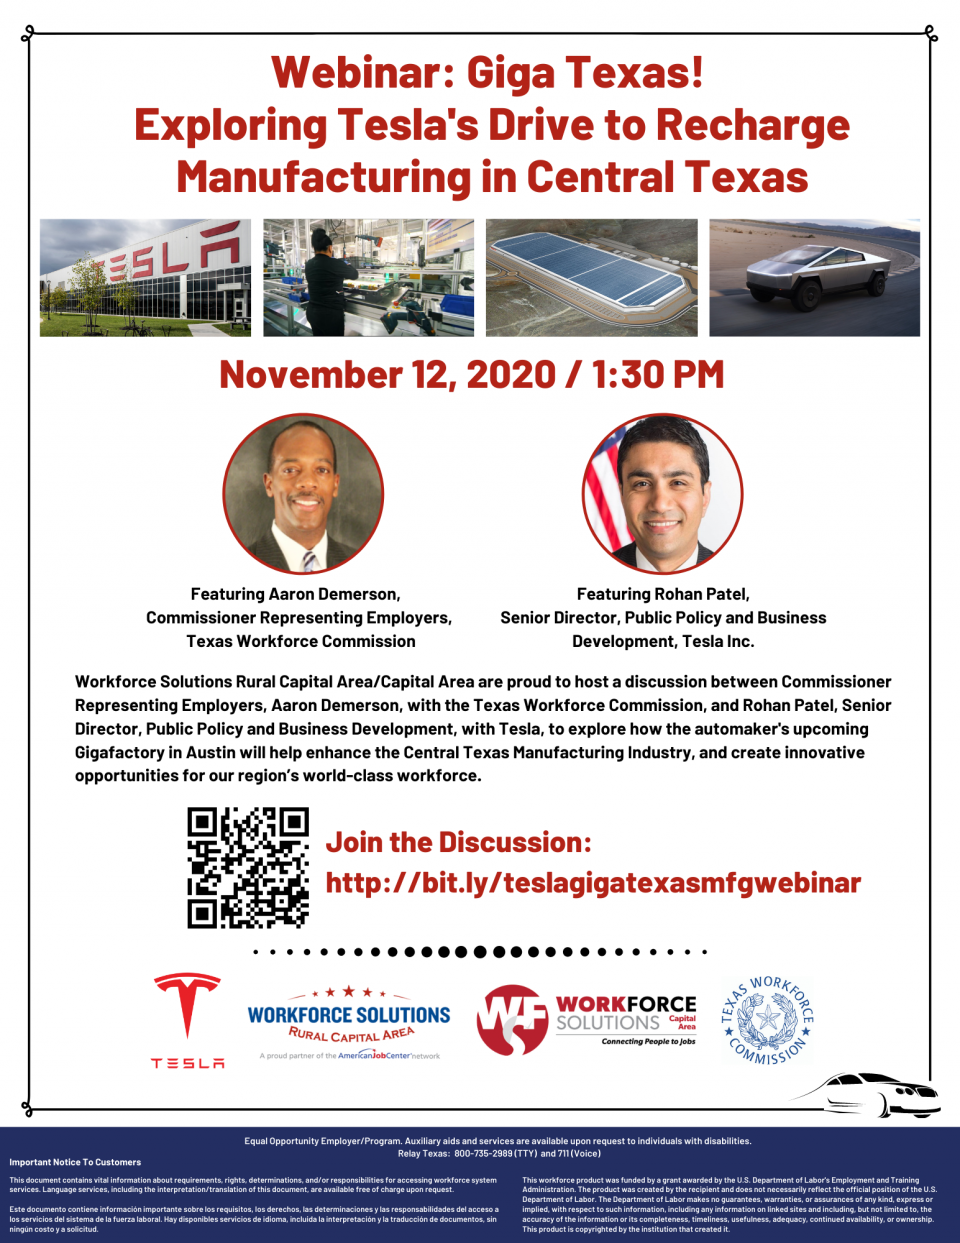 Don't Miss Thursday's Webinar: Giga Texas! Exploring Tesla's Drive to Recharge Manufacturing in Central Texas